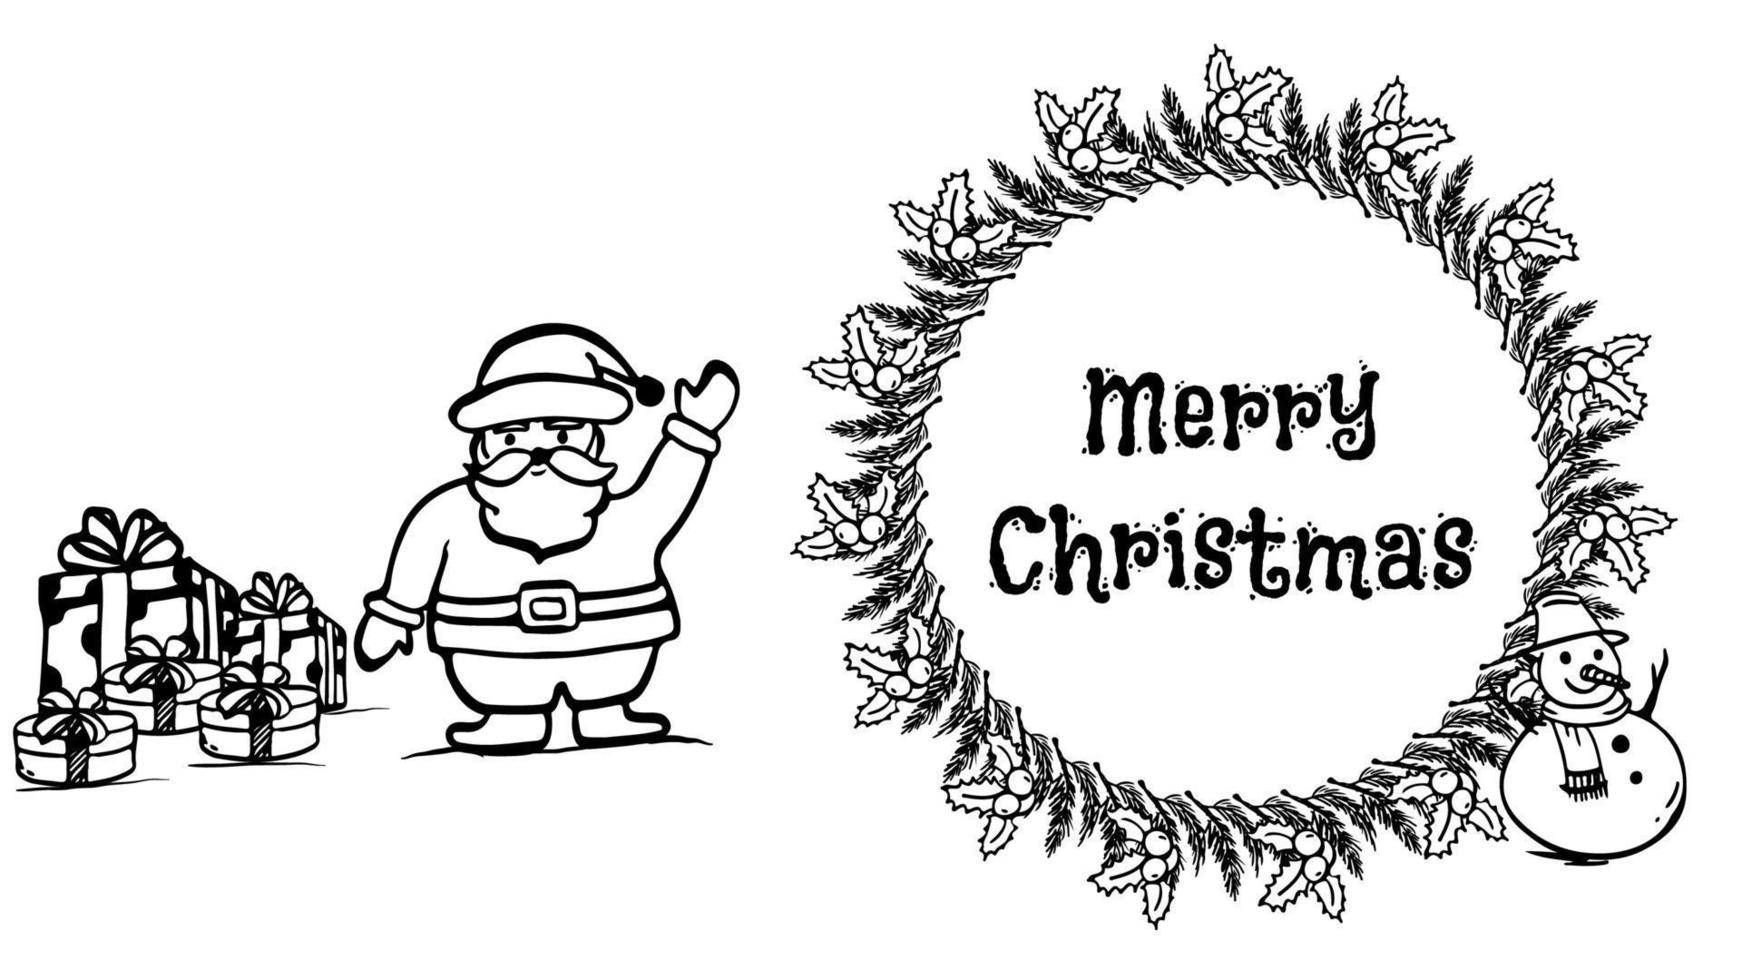 hand drawn christmas vector illustration created with santa claus, snowman, gift boxes and christmas wreath objects. merry christmas